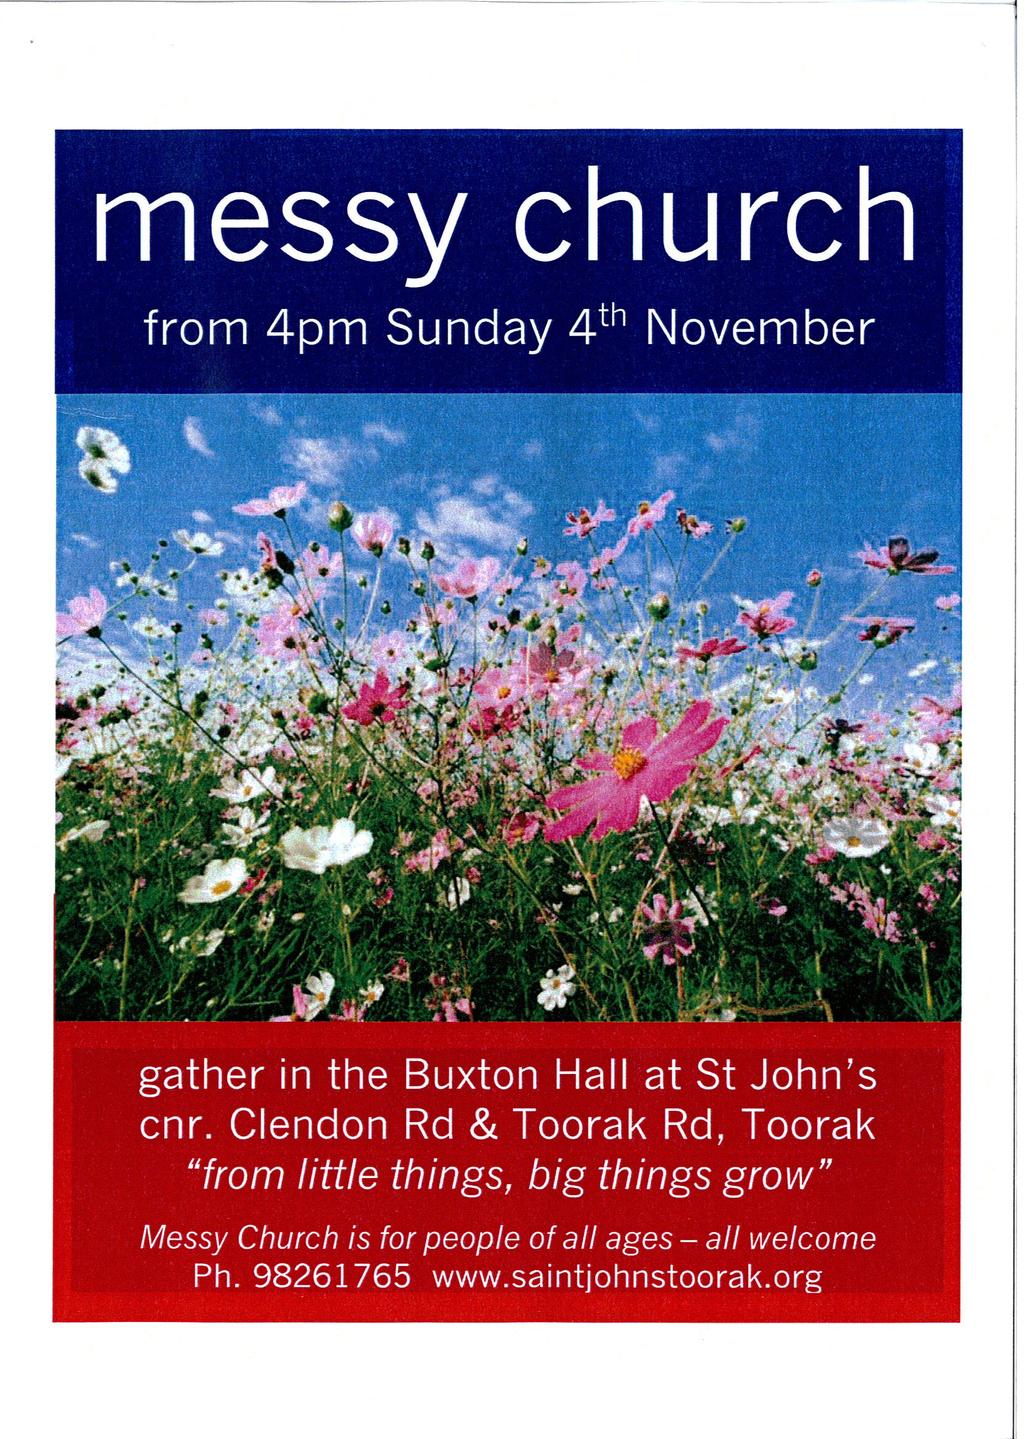 messy church from